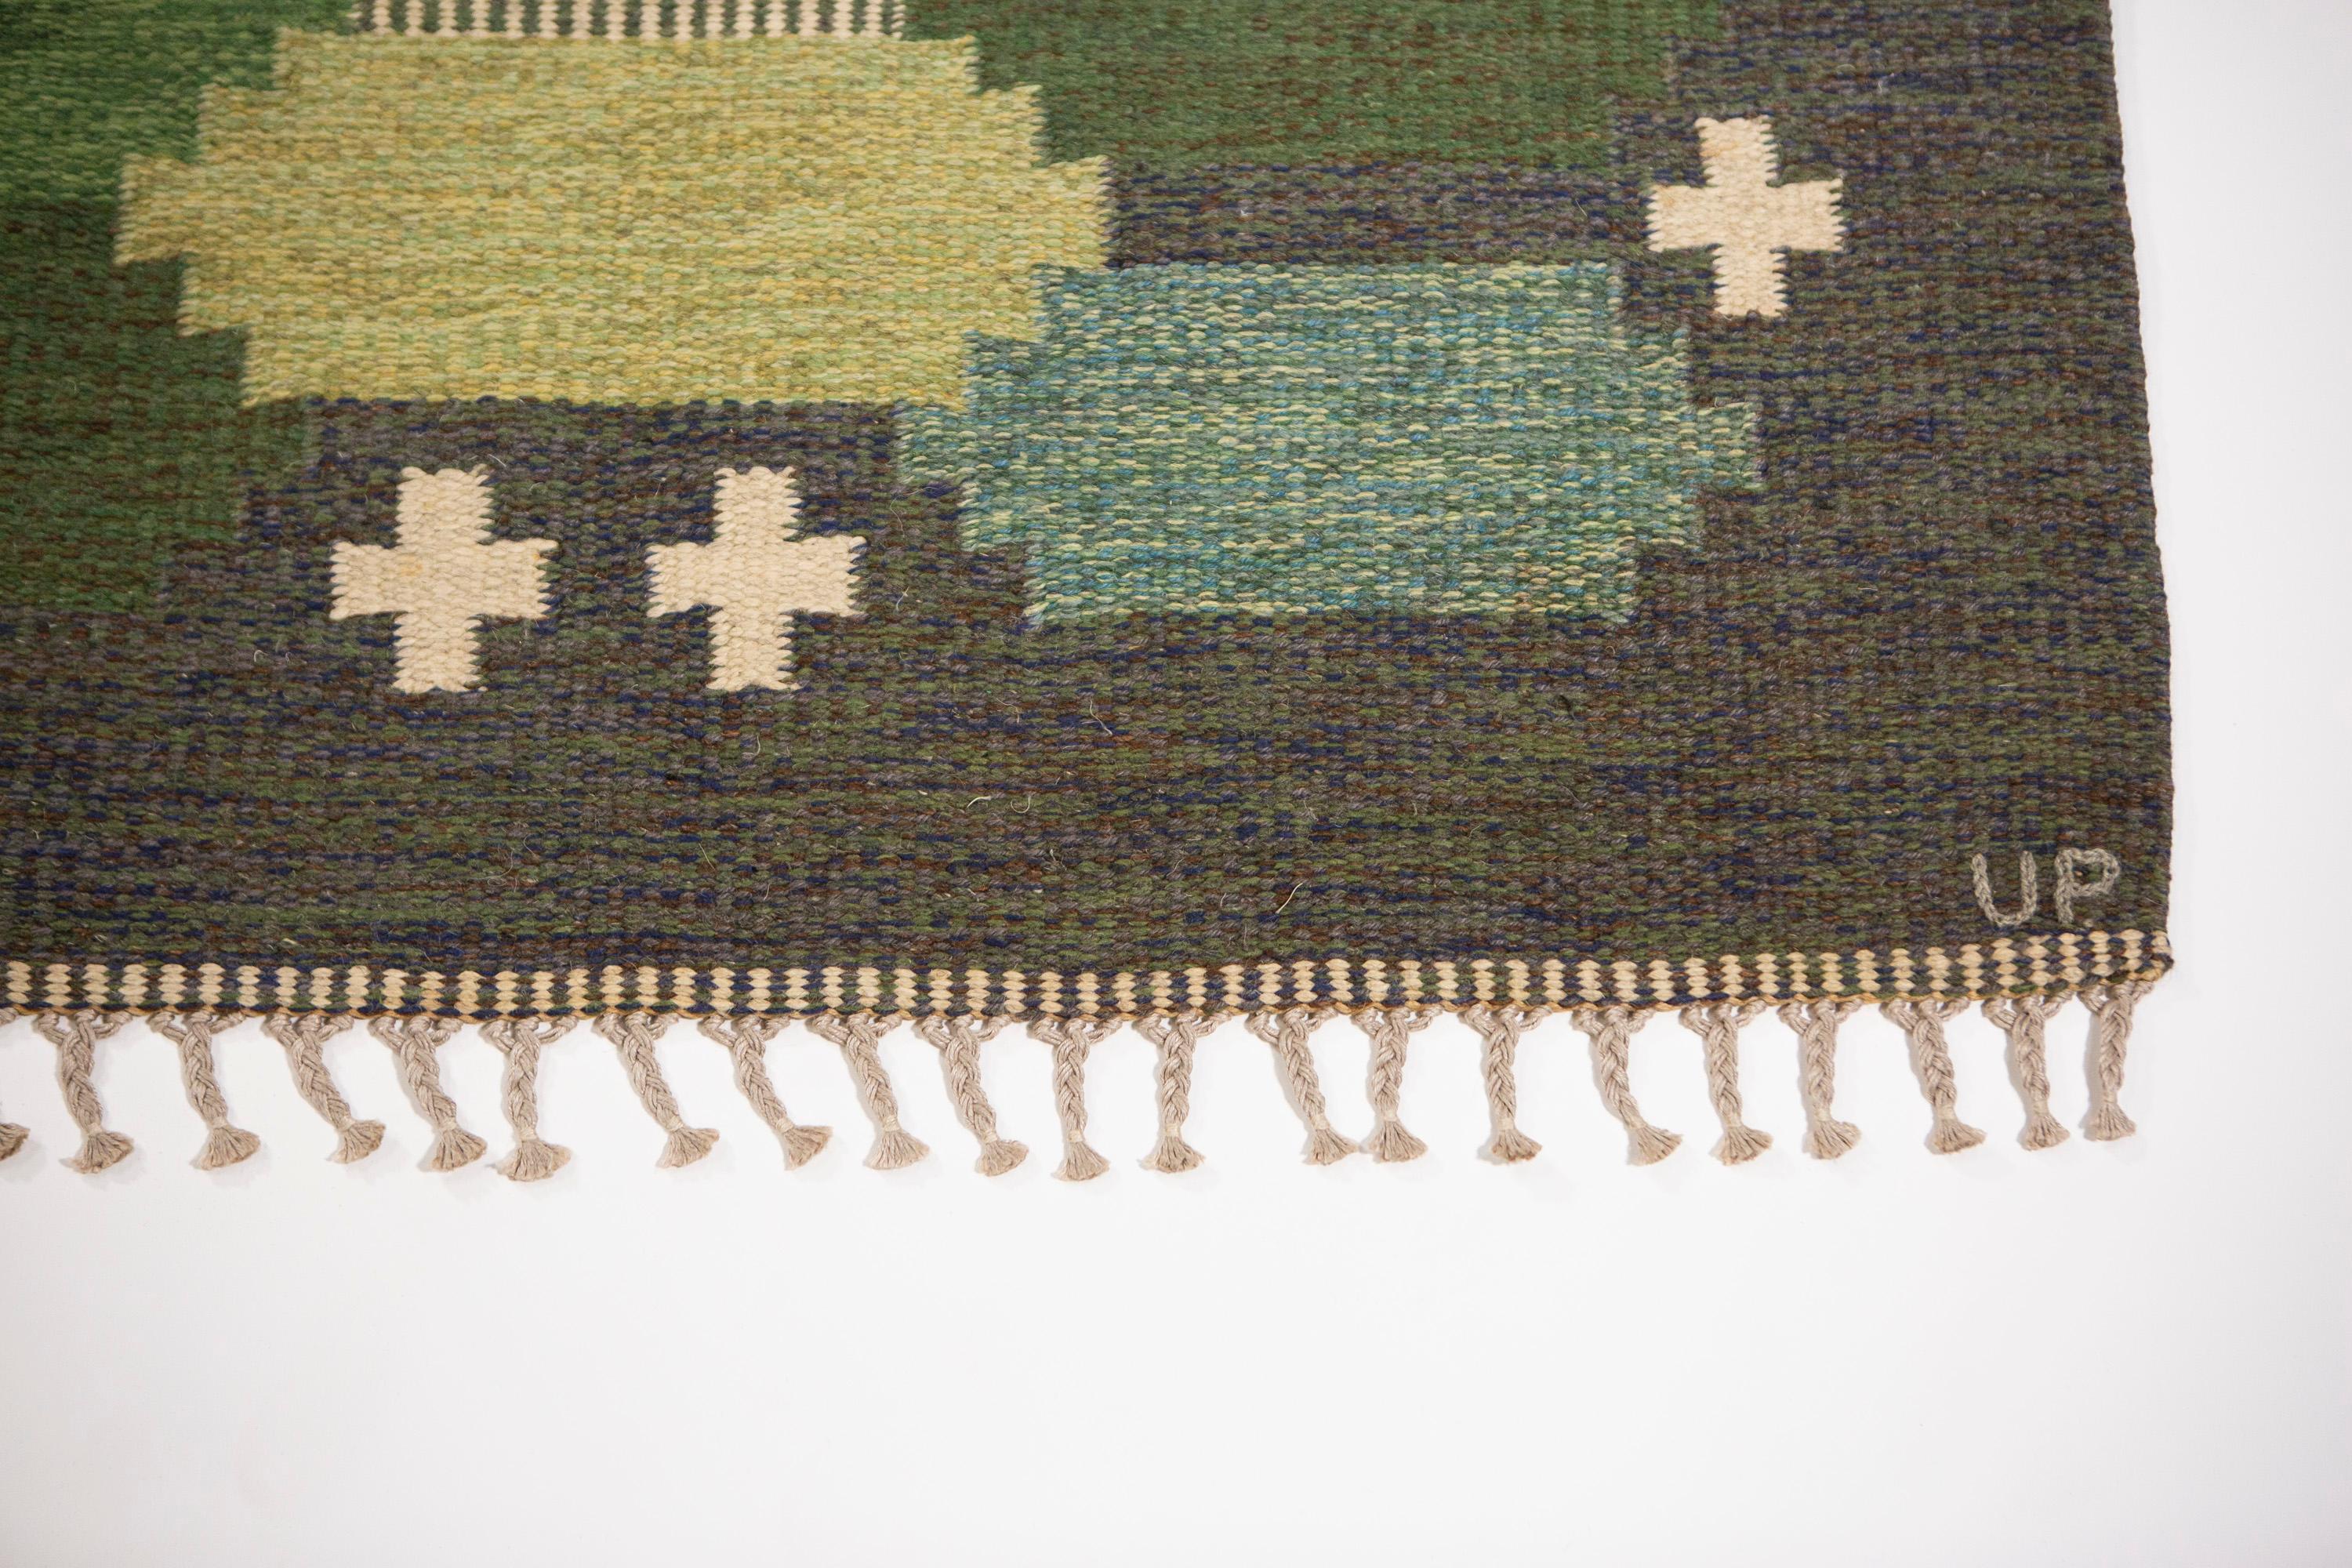 20th Century Ulla Parkdal Green Swedish Flat Weave Hand Woven Rug Signed Up Sweden, 1960's